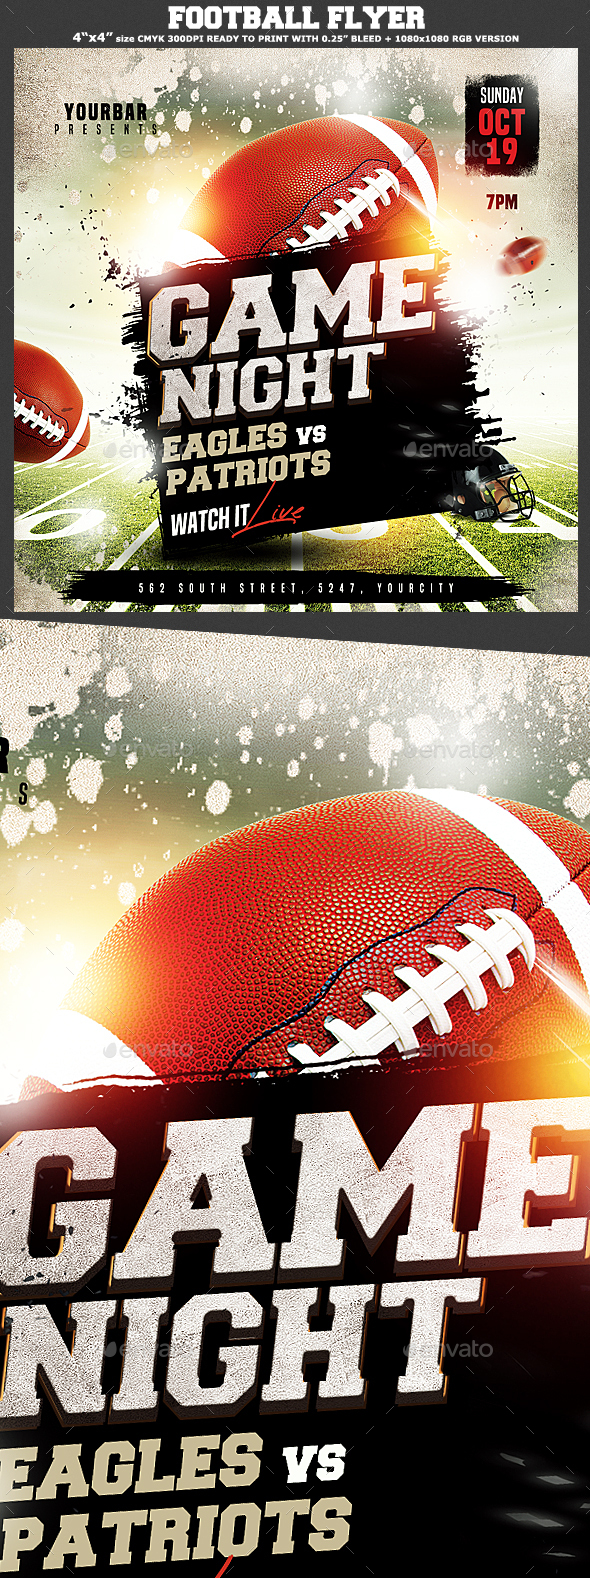 Super Bowl Party Flyer Template from previews.customer.envatousercontent.com